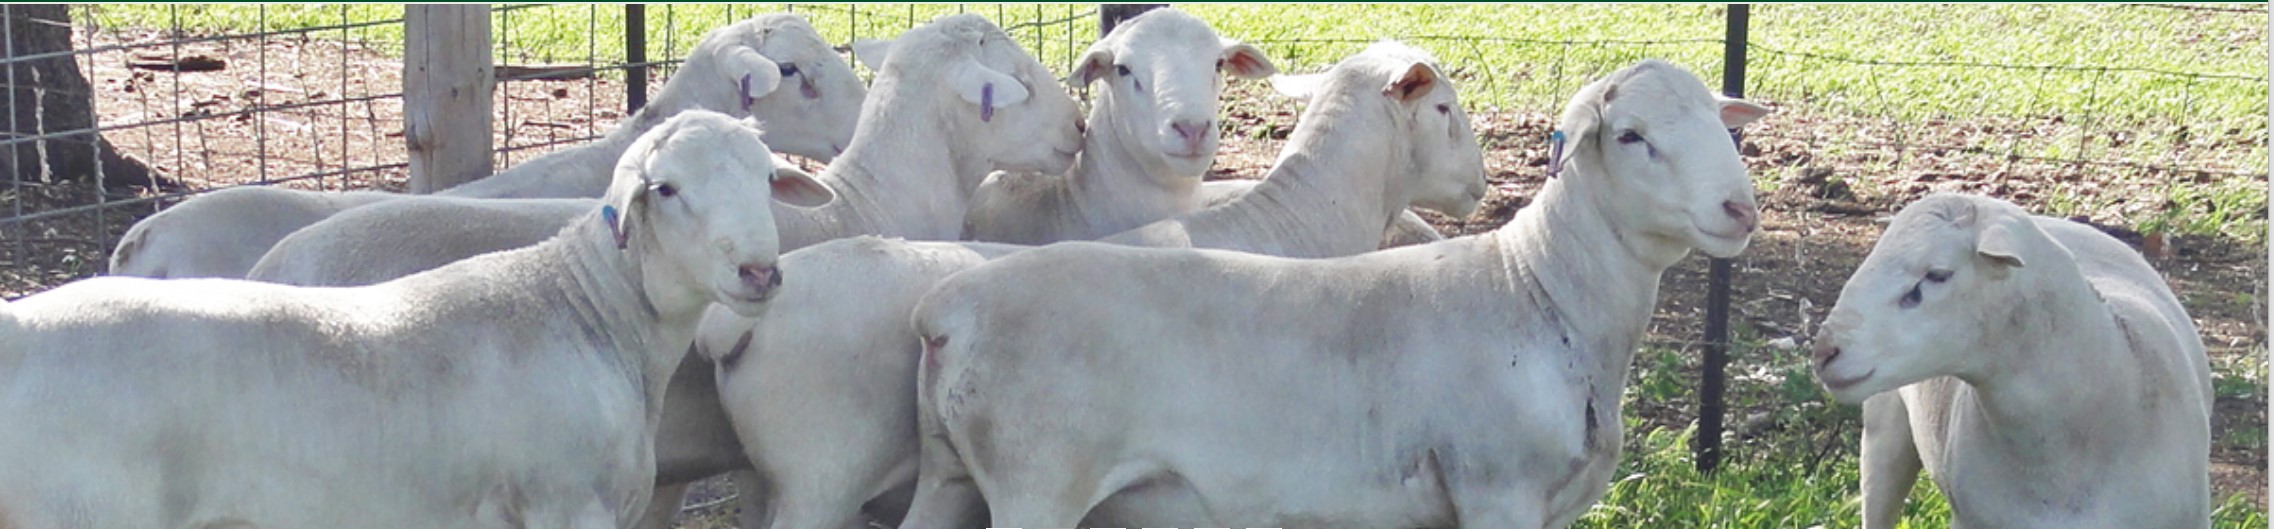 Dorper hair sheep will be the focus of a field day at the Dickinson Research Extension Center on Sept. 6. (Photo courtesy of American Dorper Sheep Breeders’ Society)